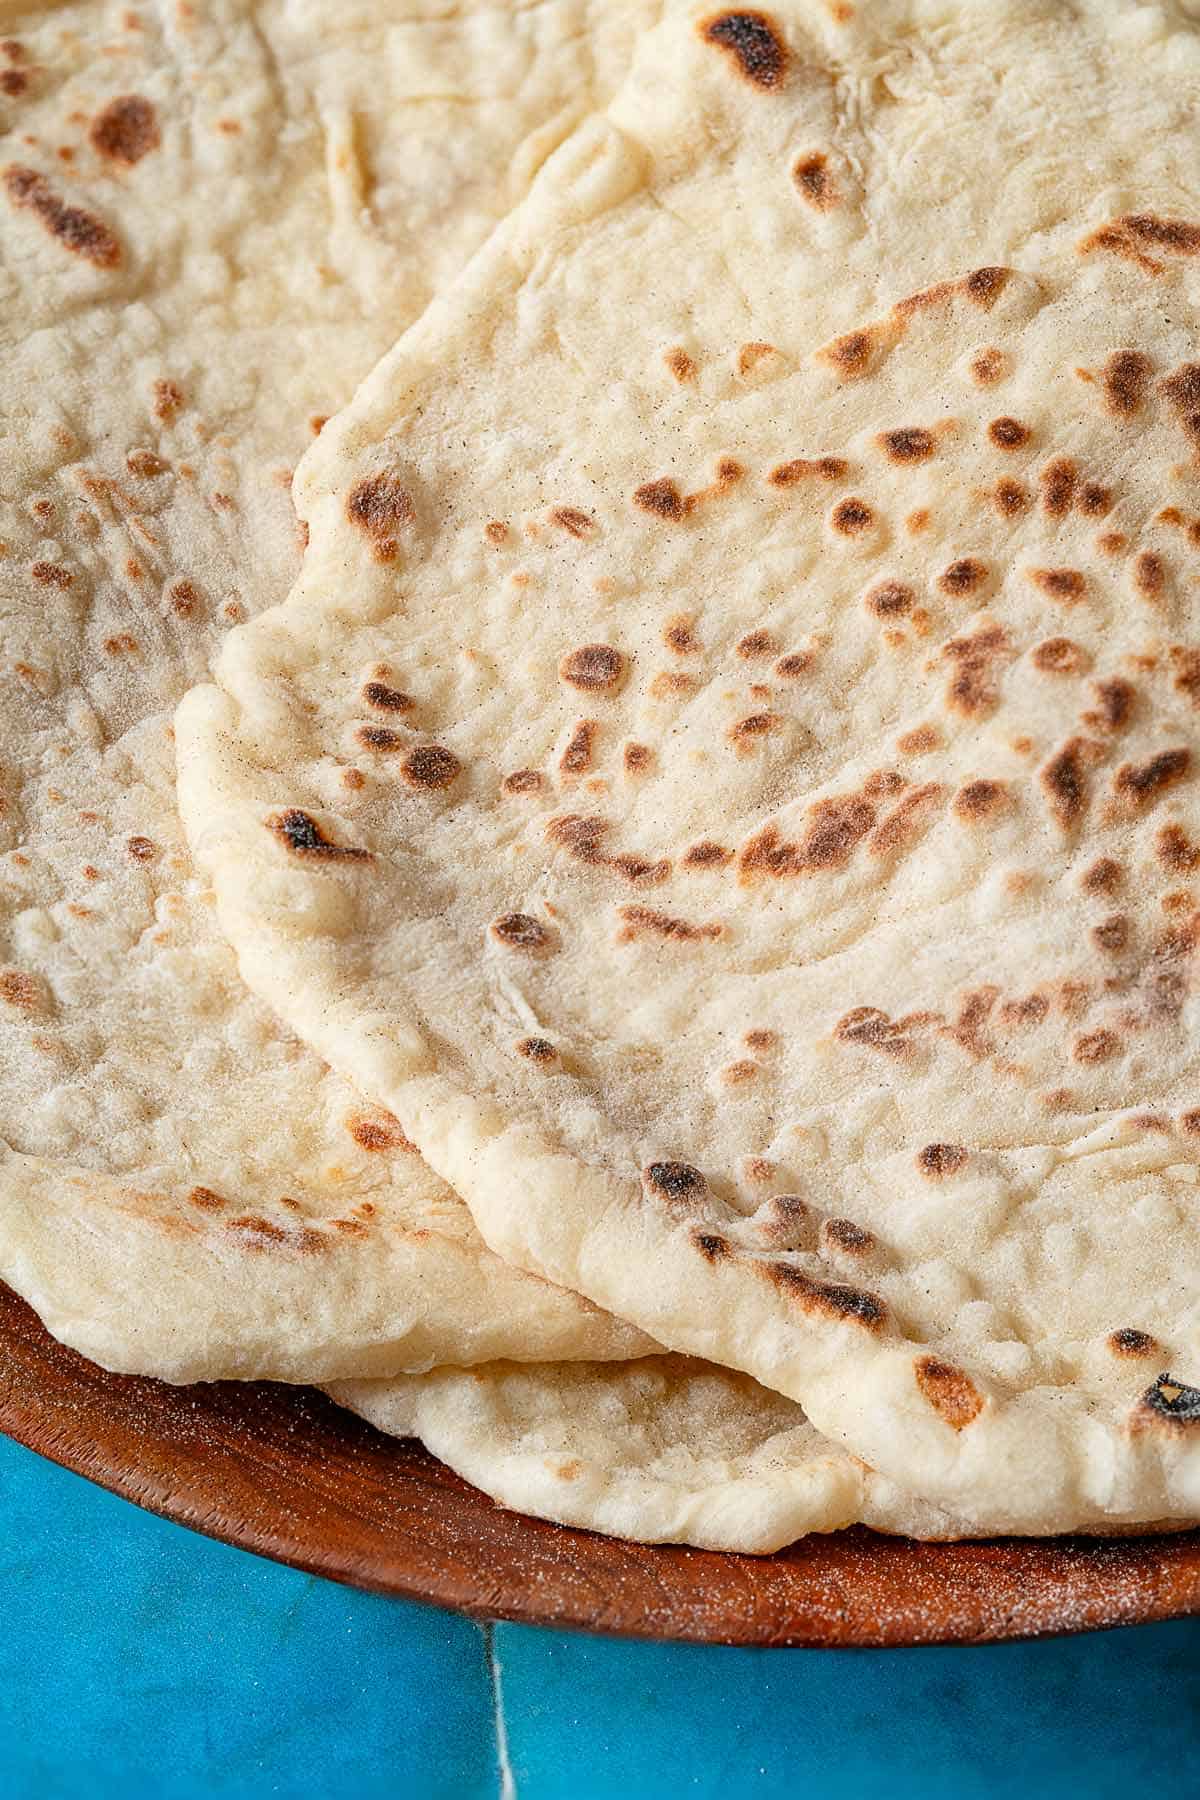 Close up of lavash bread, showing the golden brown spots where it hit the pan.